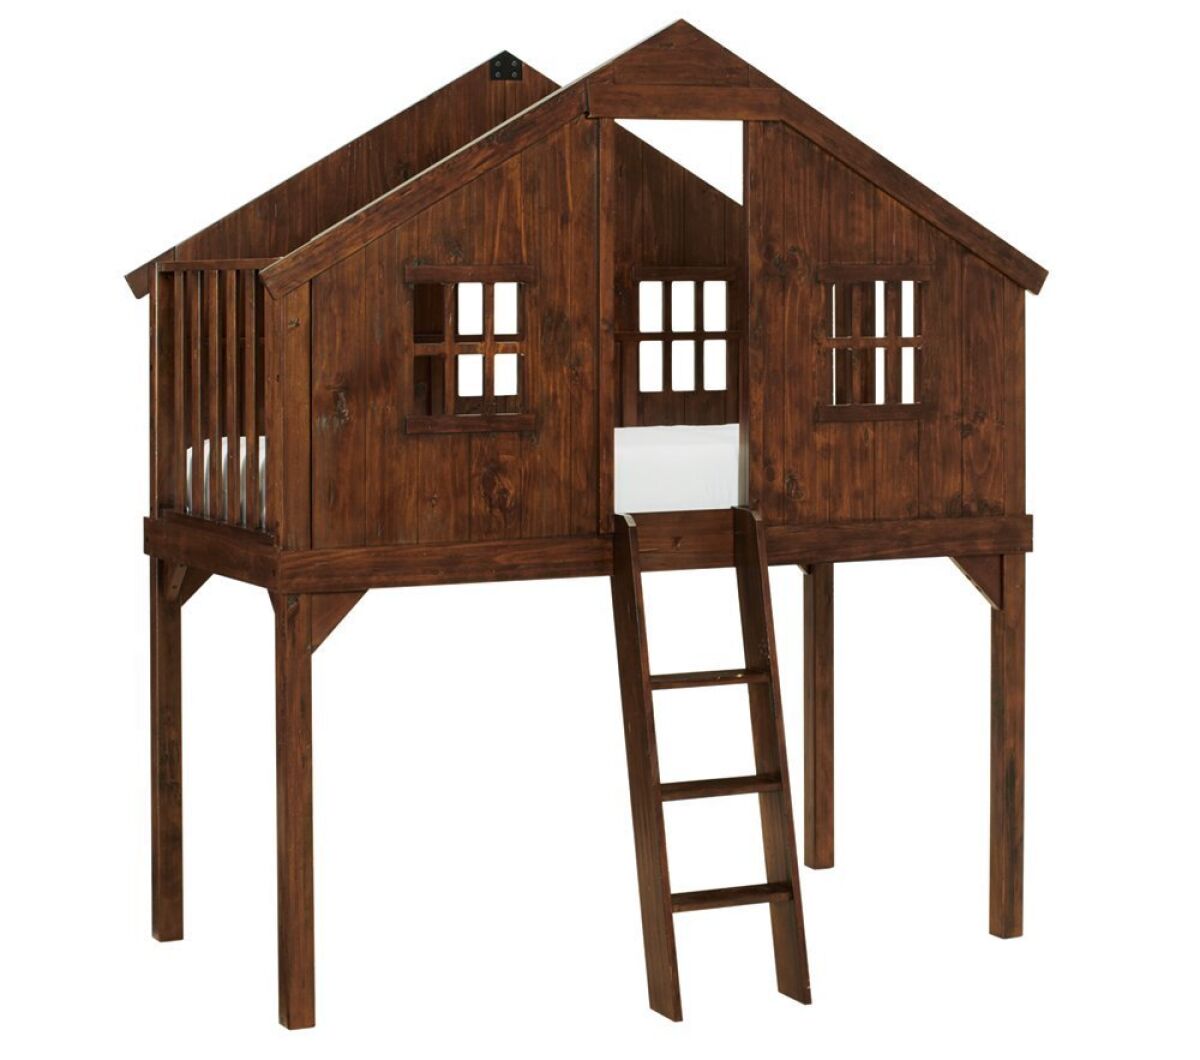 Lofted Treehouse Bed, $1,599 at Pottery Barn Kids.